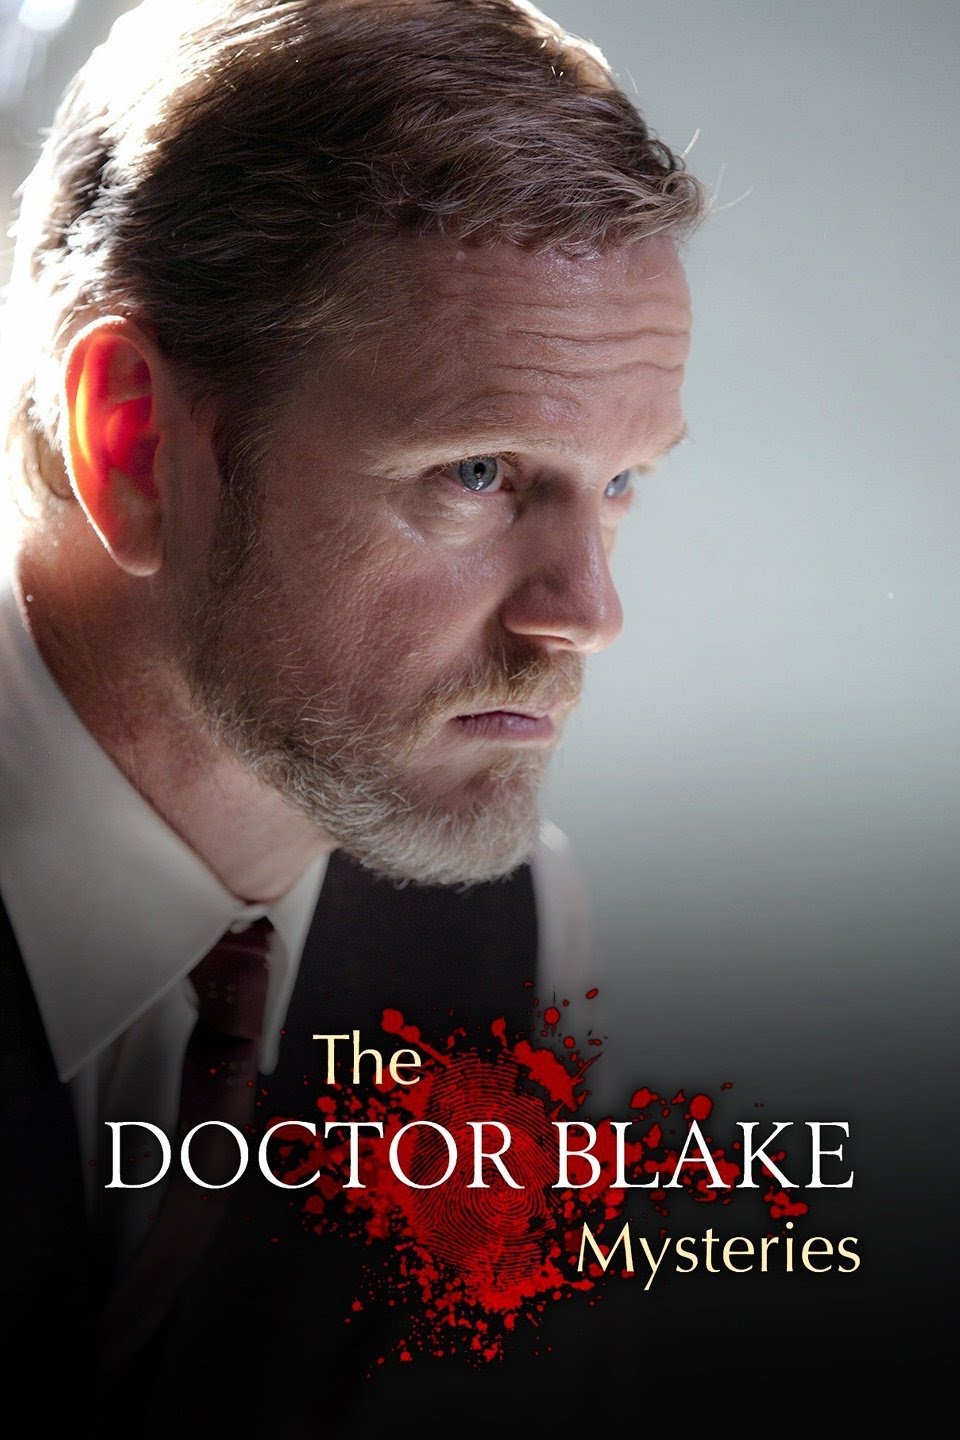 The Doctor Blake Mysteries S2 D2